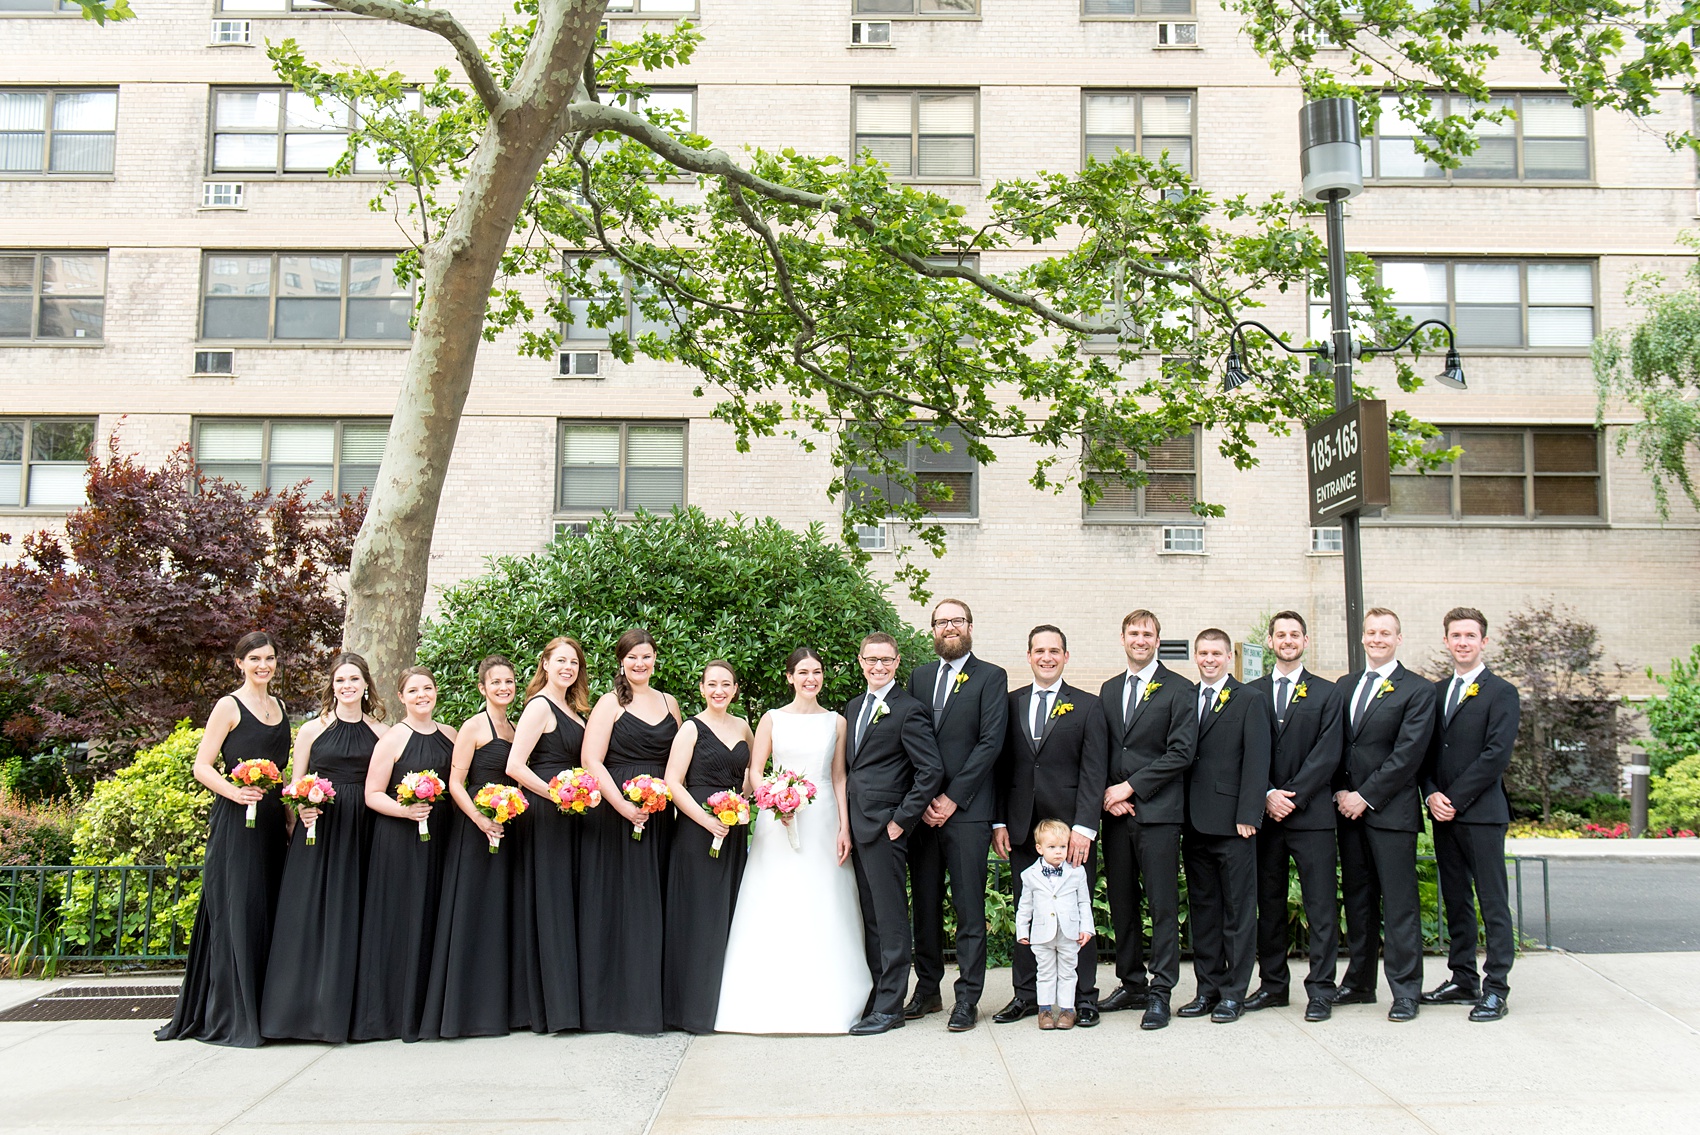 Manhattan Central Park wedding photos by Mikkel Paige Photography at Loeb Boathouse venue. These ceremony and reception pictures show a timeless couple having fun at their colorful day with guests who traveled in from abroad. The bride and groom took their pictures on the Upper West Side with the bridal party. The bridesmaids wore mismatched long black chiffon dresses and groomsmen wore black suits and dark Penguin ties for their June celebration. Colorful flowers and a peony bouquet brightened the scene with a pop of color. Click through for the complete post! #CentralParkWeddingVenues #NYCweddingphotographer #NYCwedding #SummerWedding #ClassicGroomsmen #BlackBridesmaidsGowns #ColorfulBouquets #PeoniesBouquet